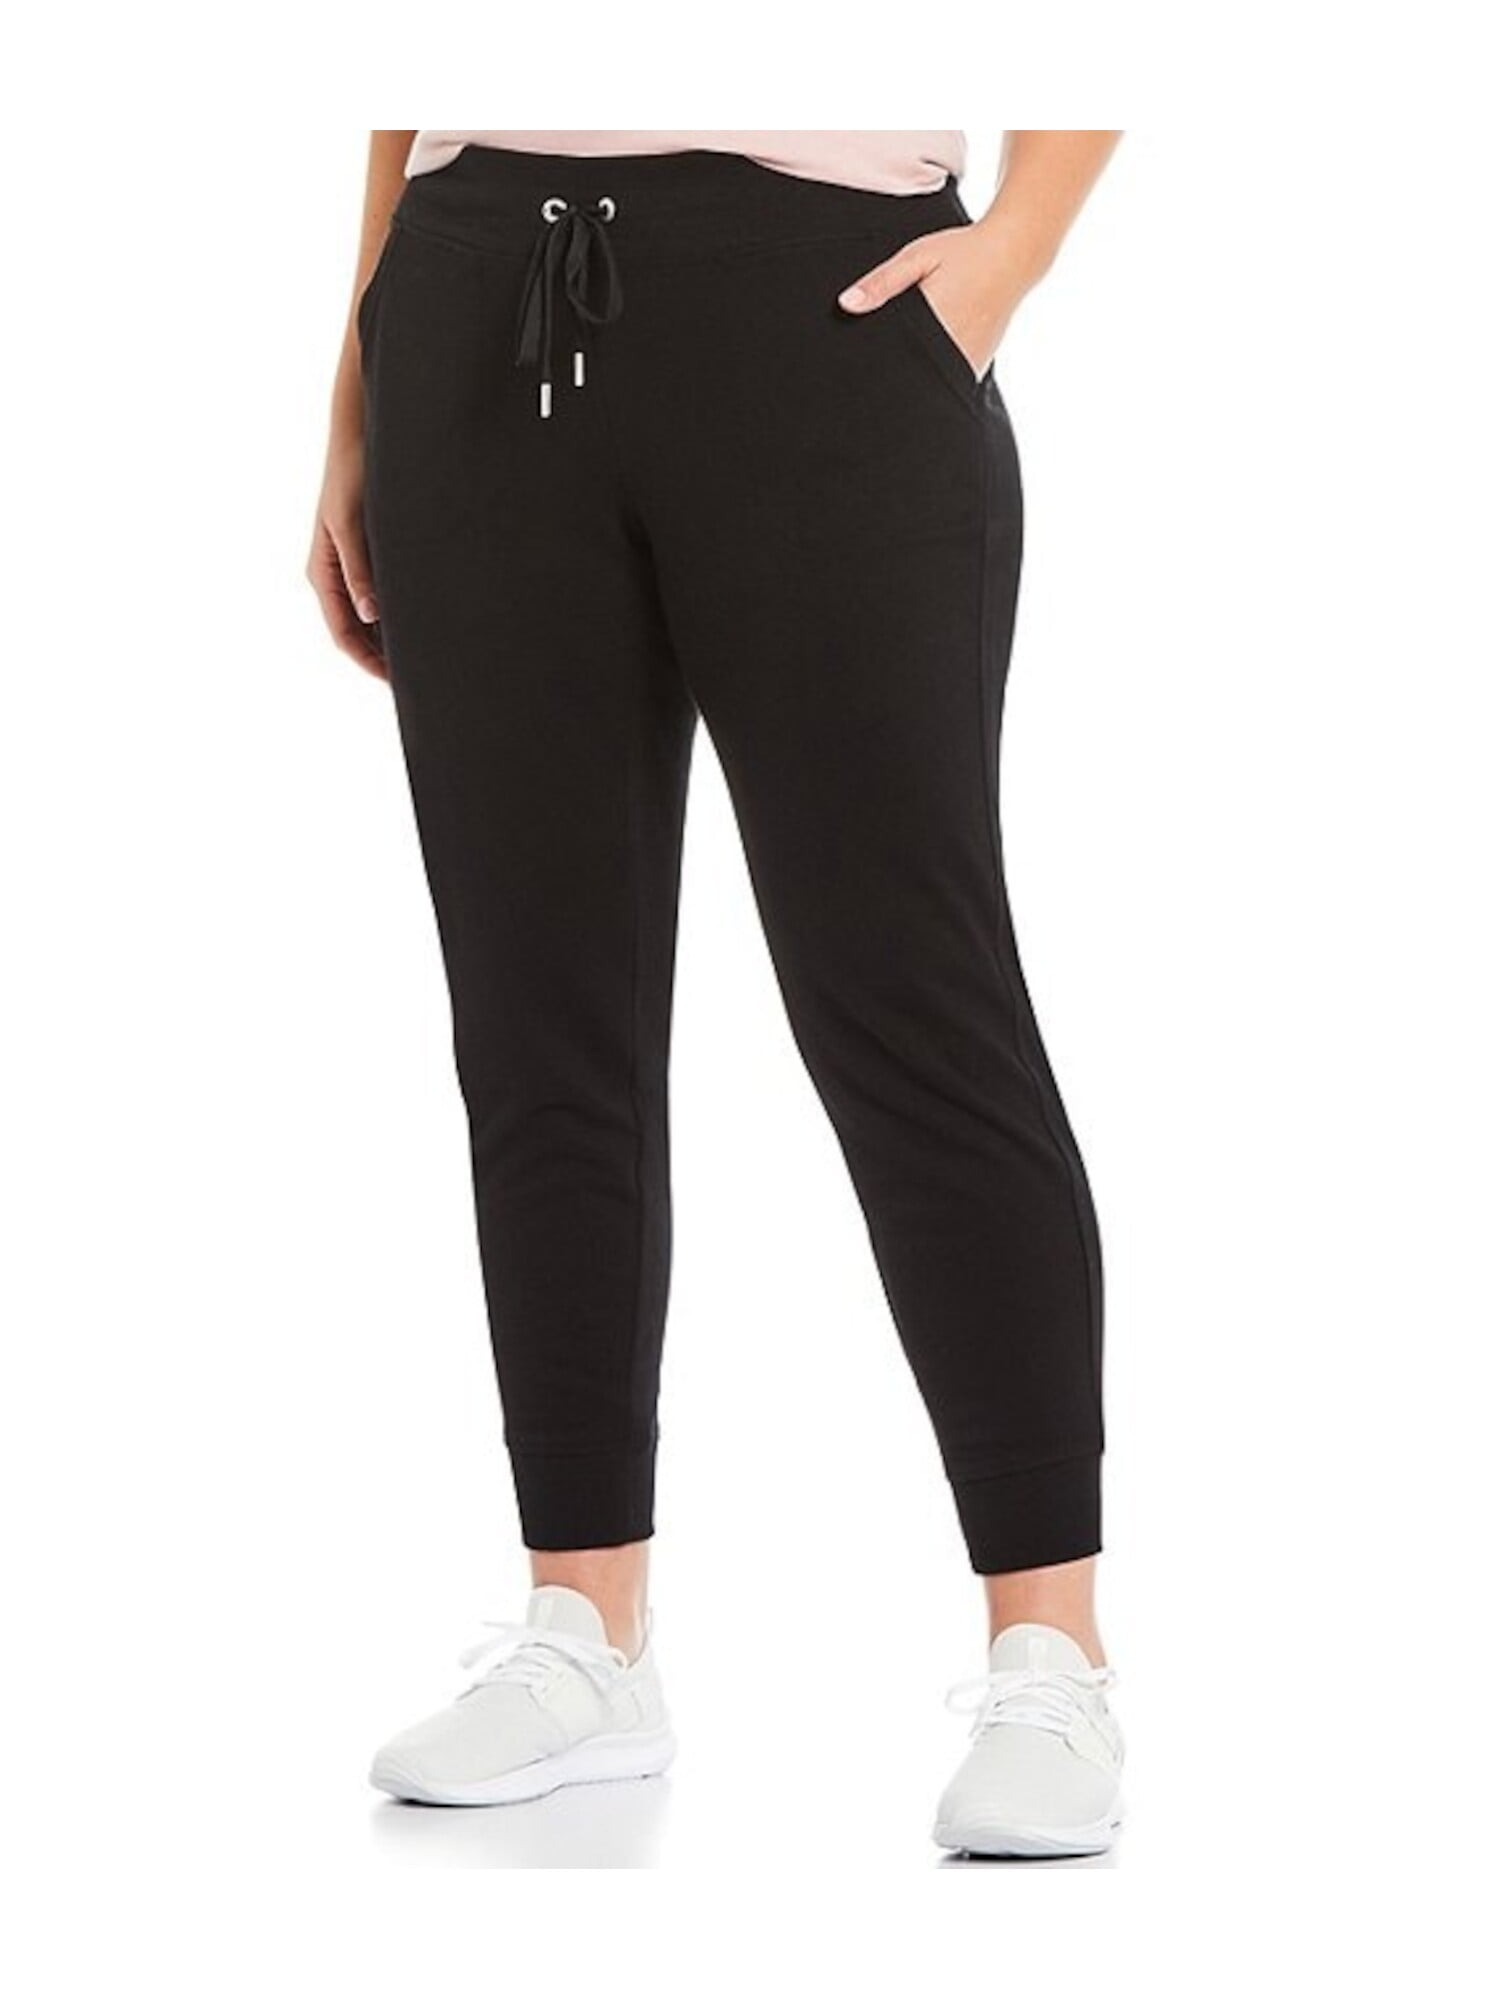 CALVIN KLEIN PERFORMANCE Womens Black Fleece Lined Pocketed Drawstring  Joggers Active Wear Pants M 